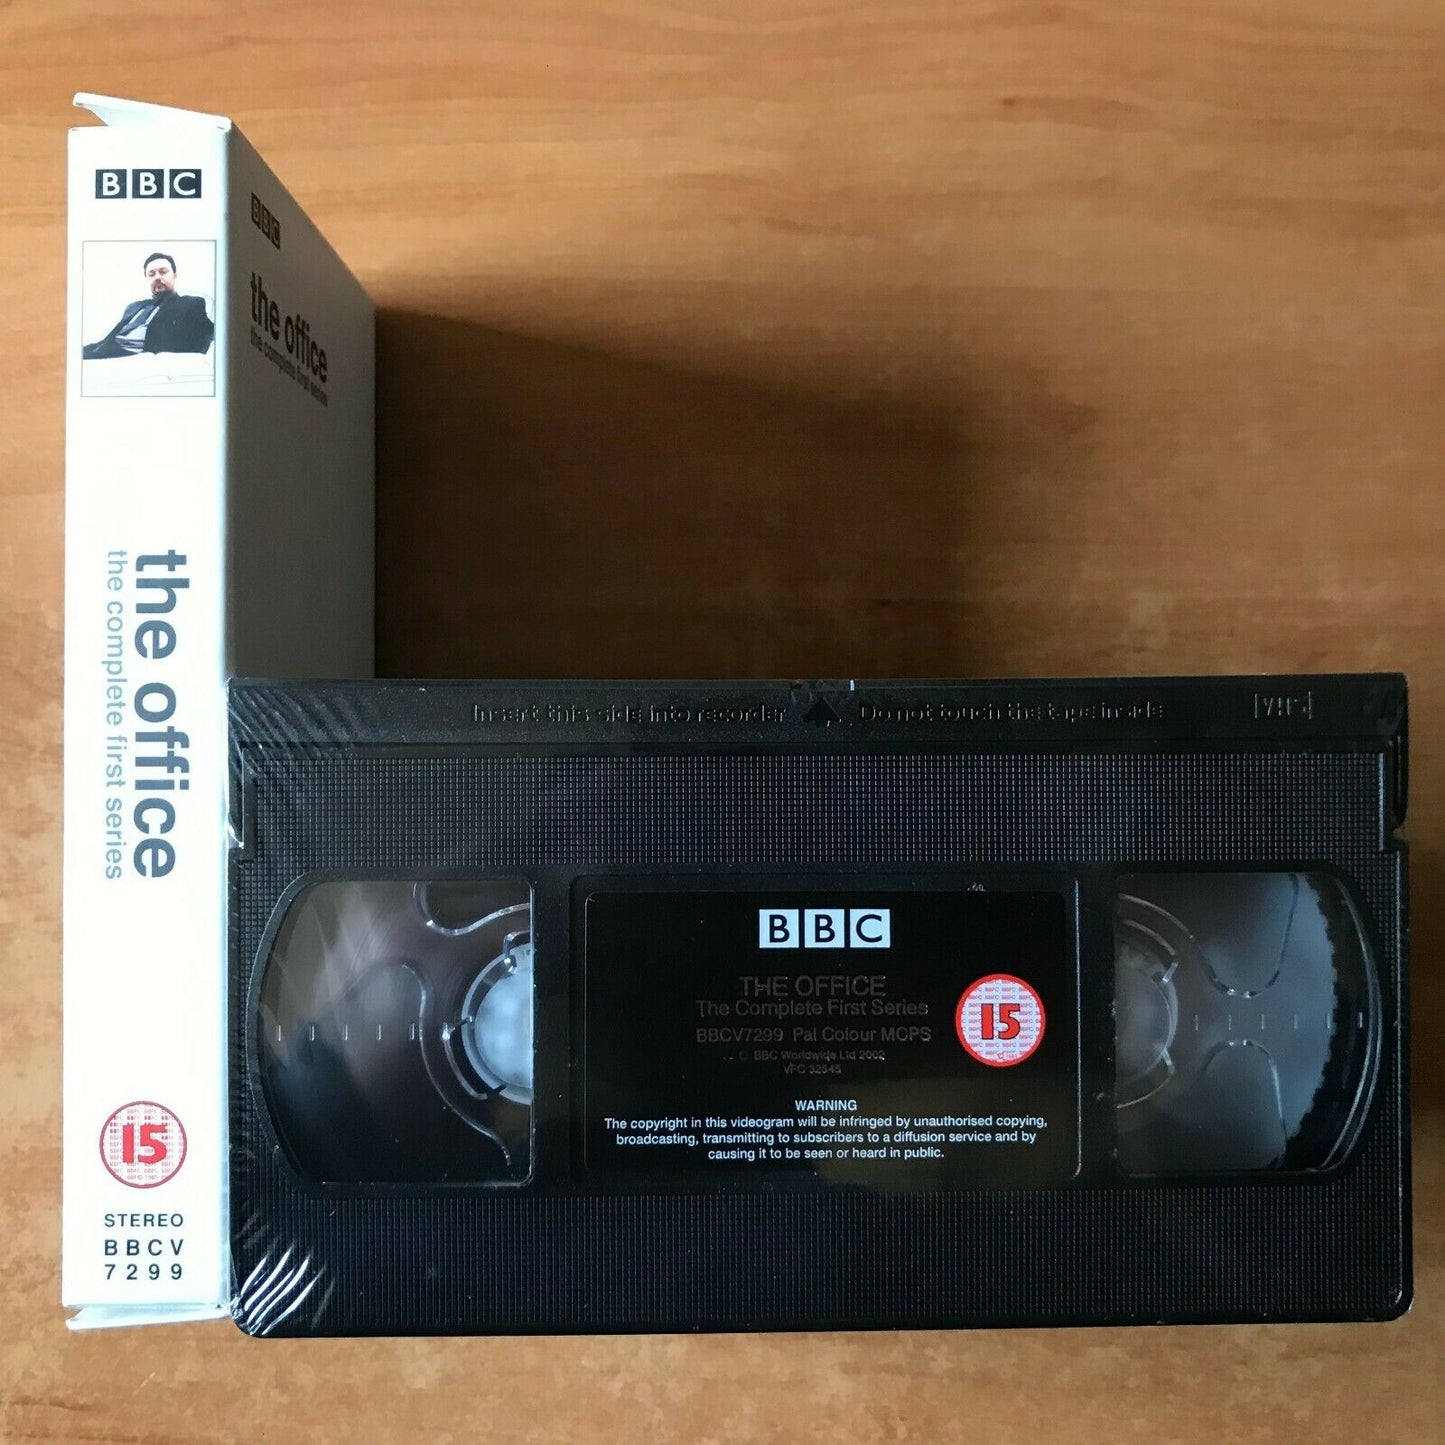 The Office [Complete 1st Series] New Sealed - BBC Comedy - Ricky Gervais - VHS-